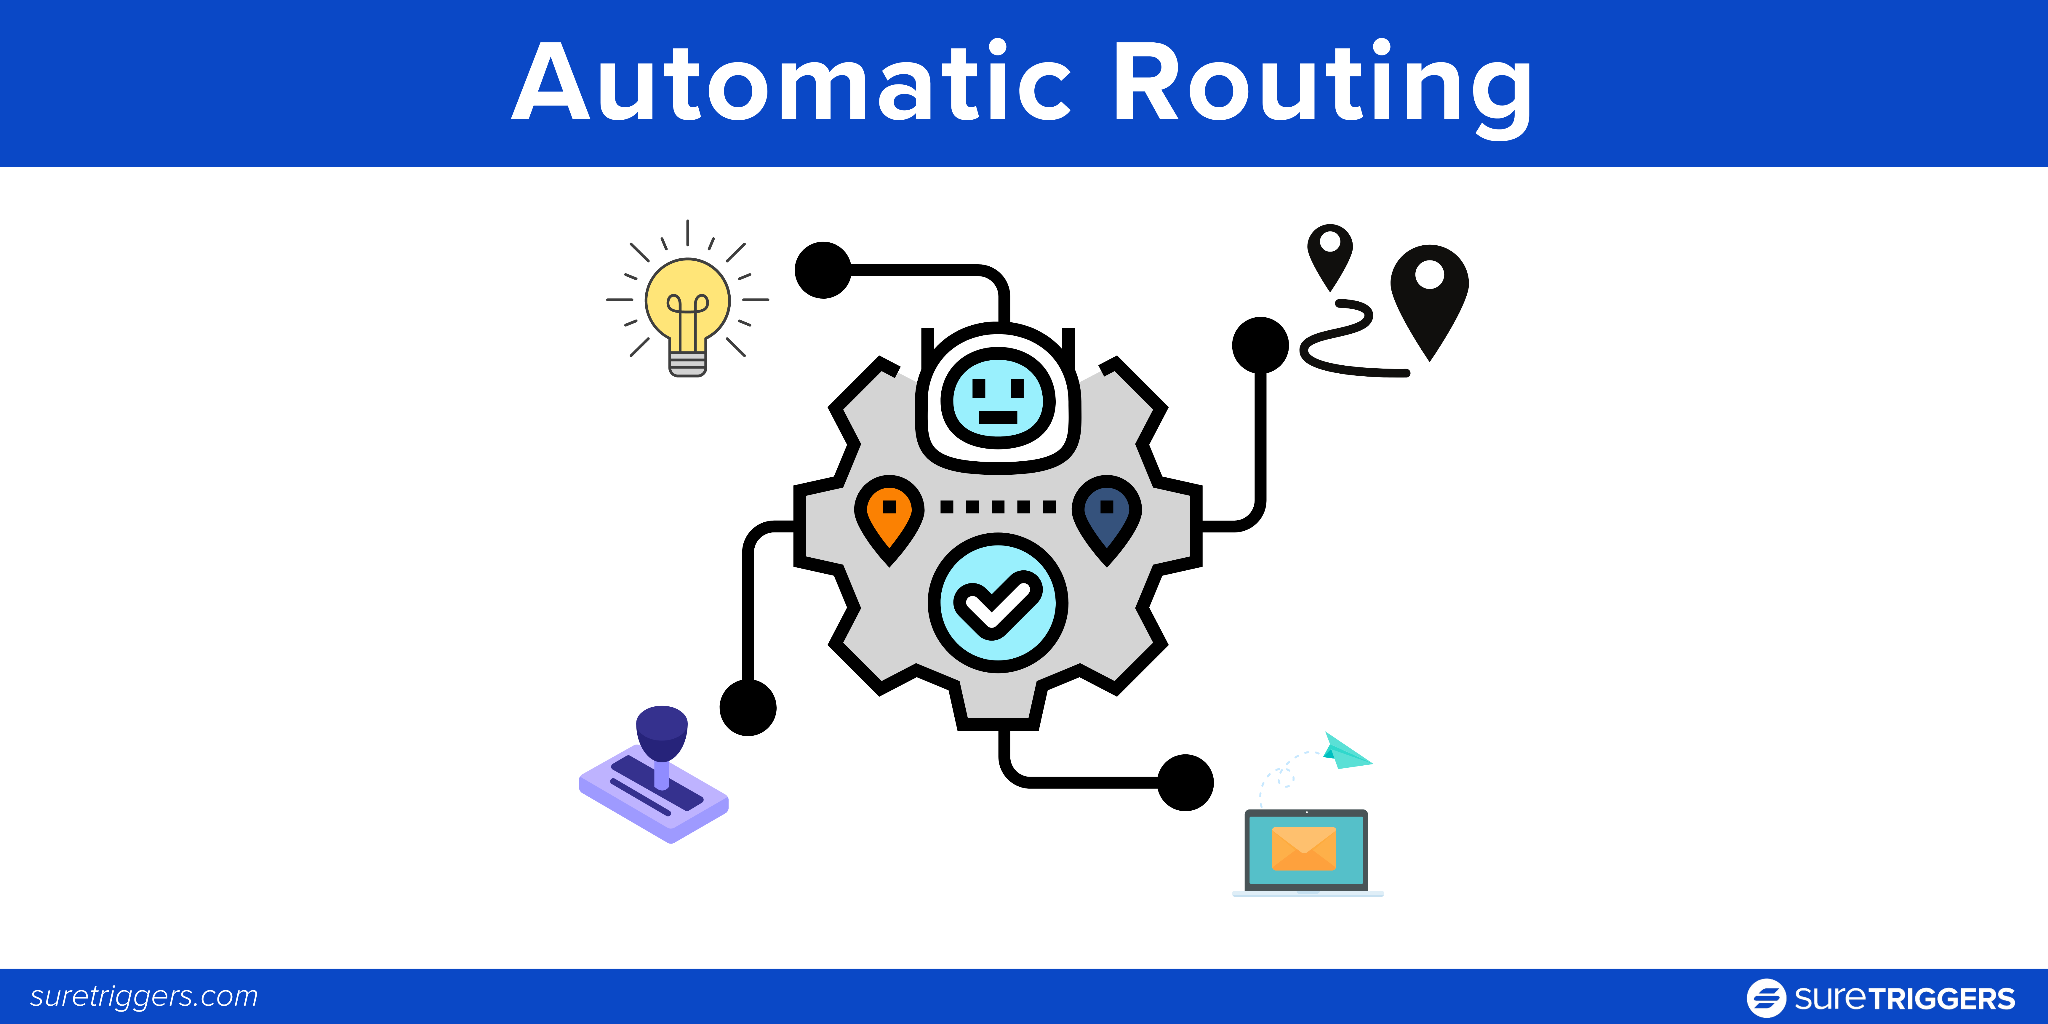 Automatic Routing: Stop Sorting, Start Acting
